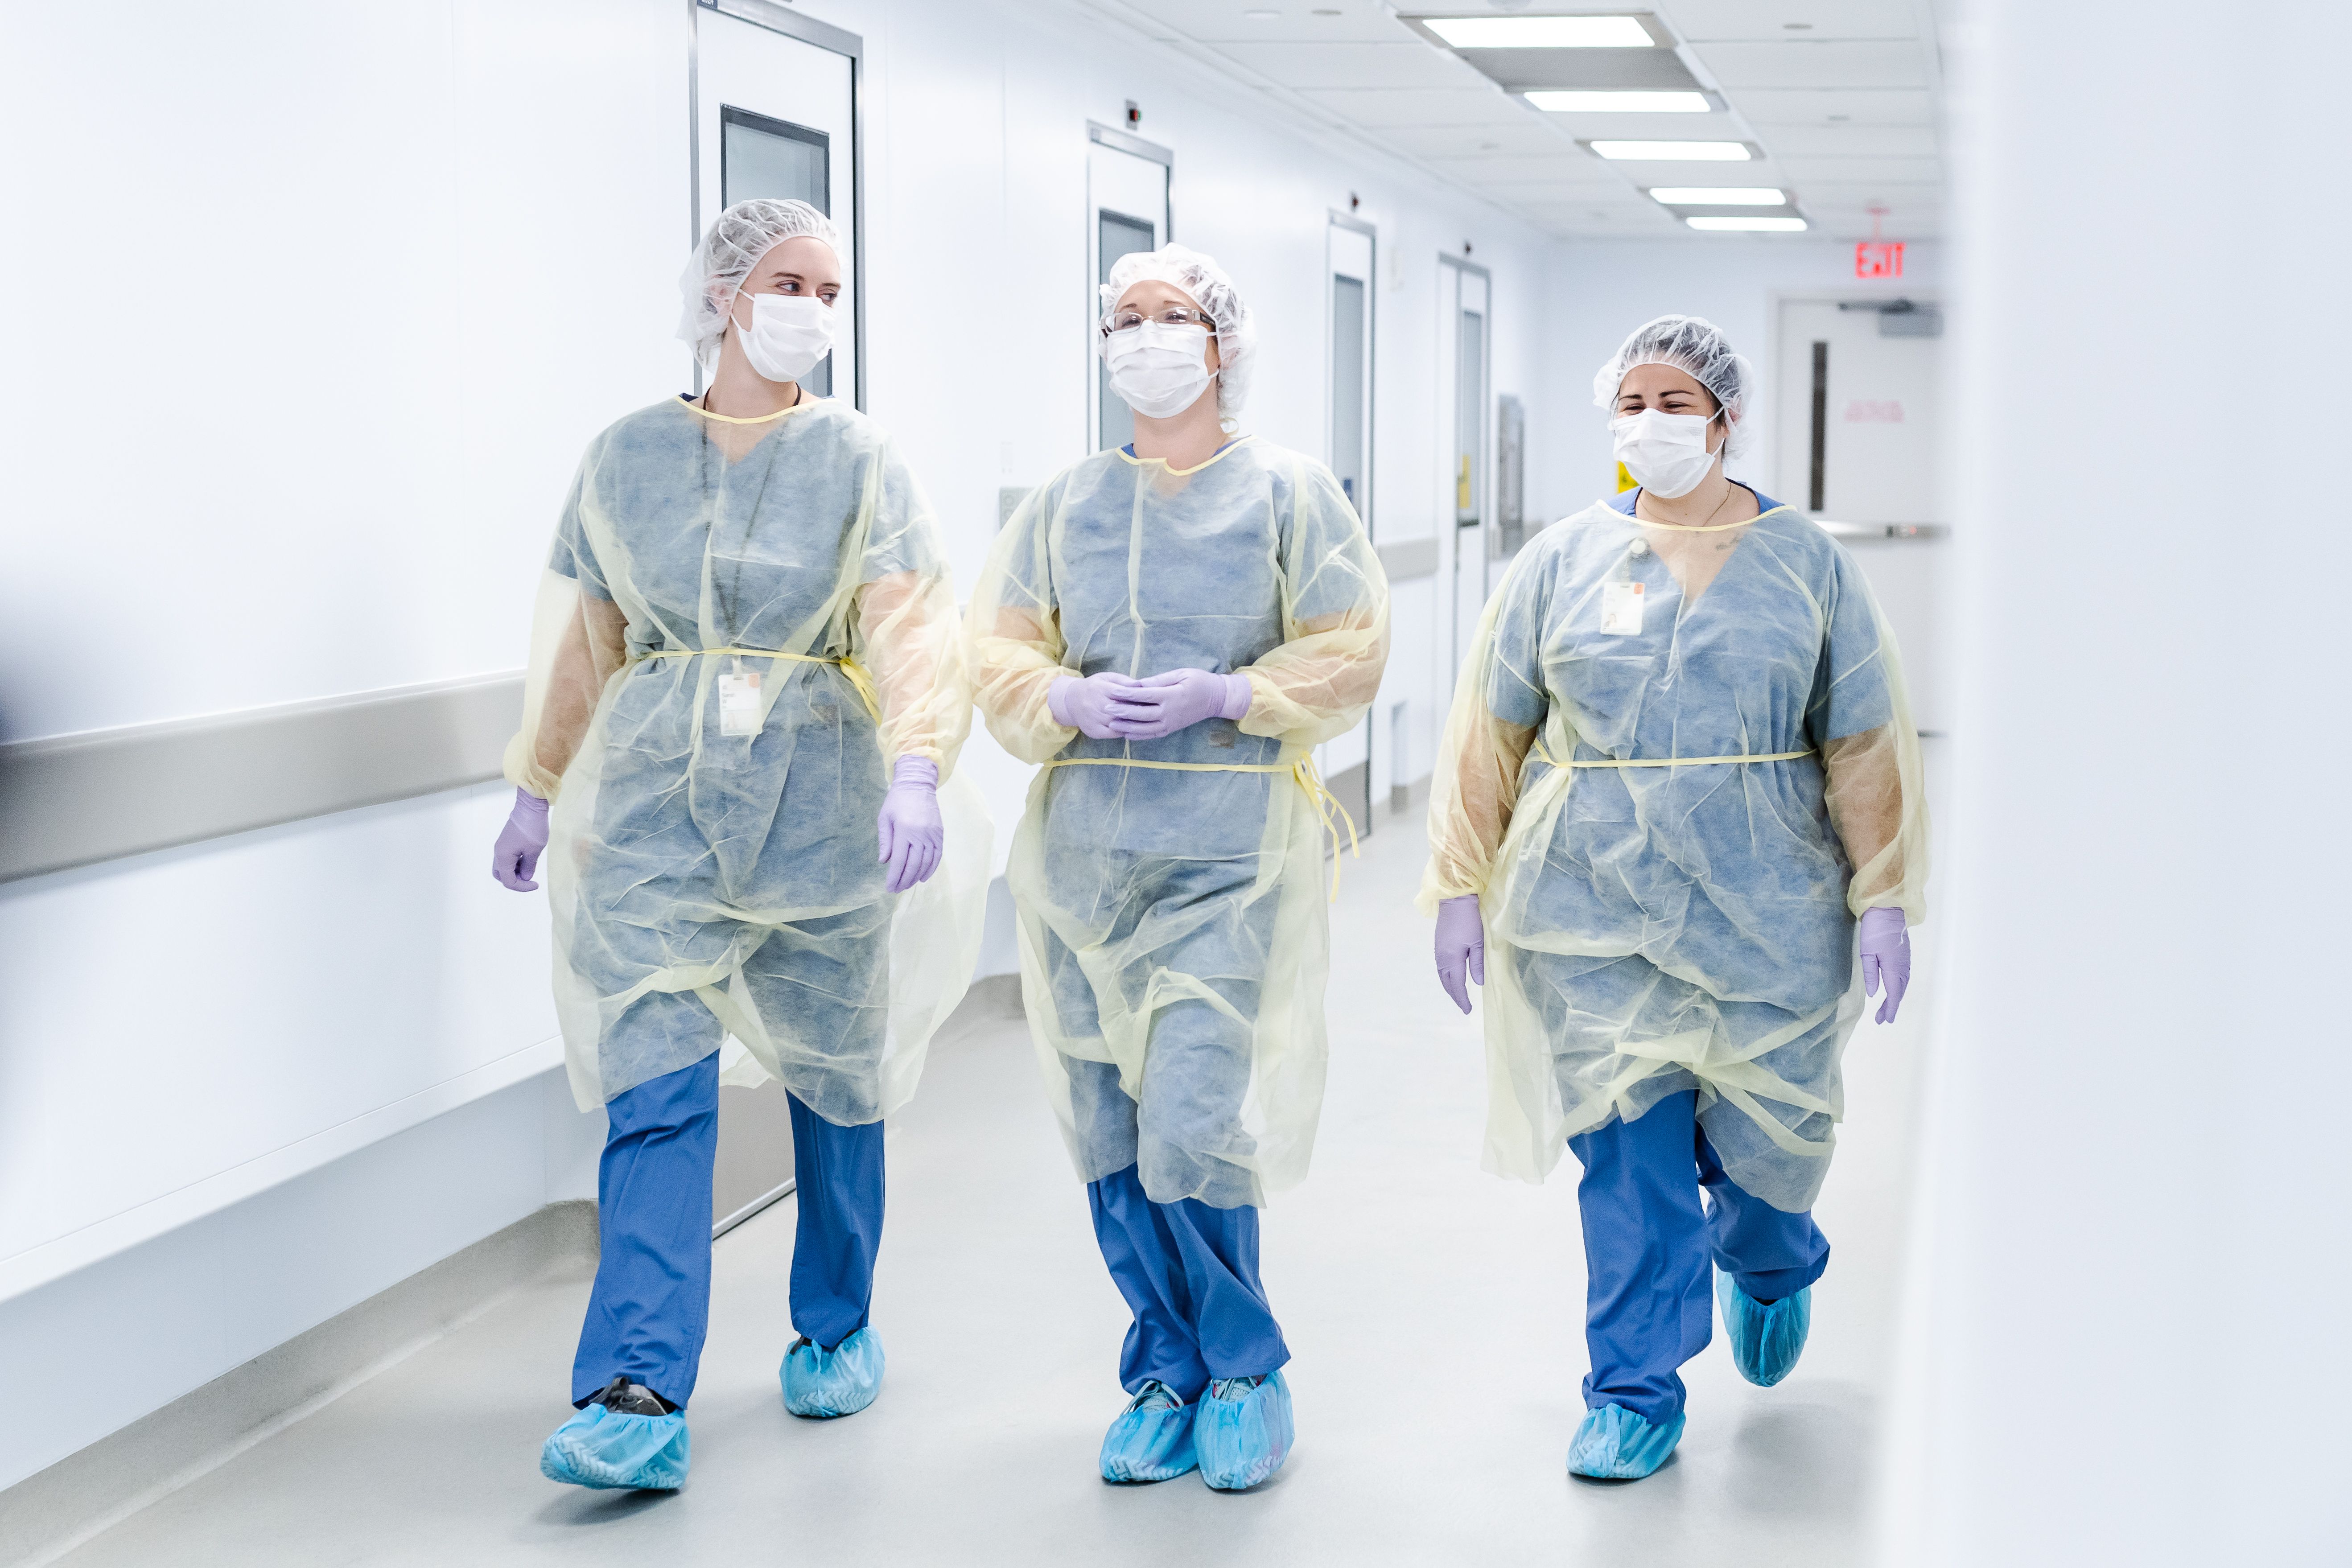 Three healthcare professionals in scrubs and gowns